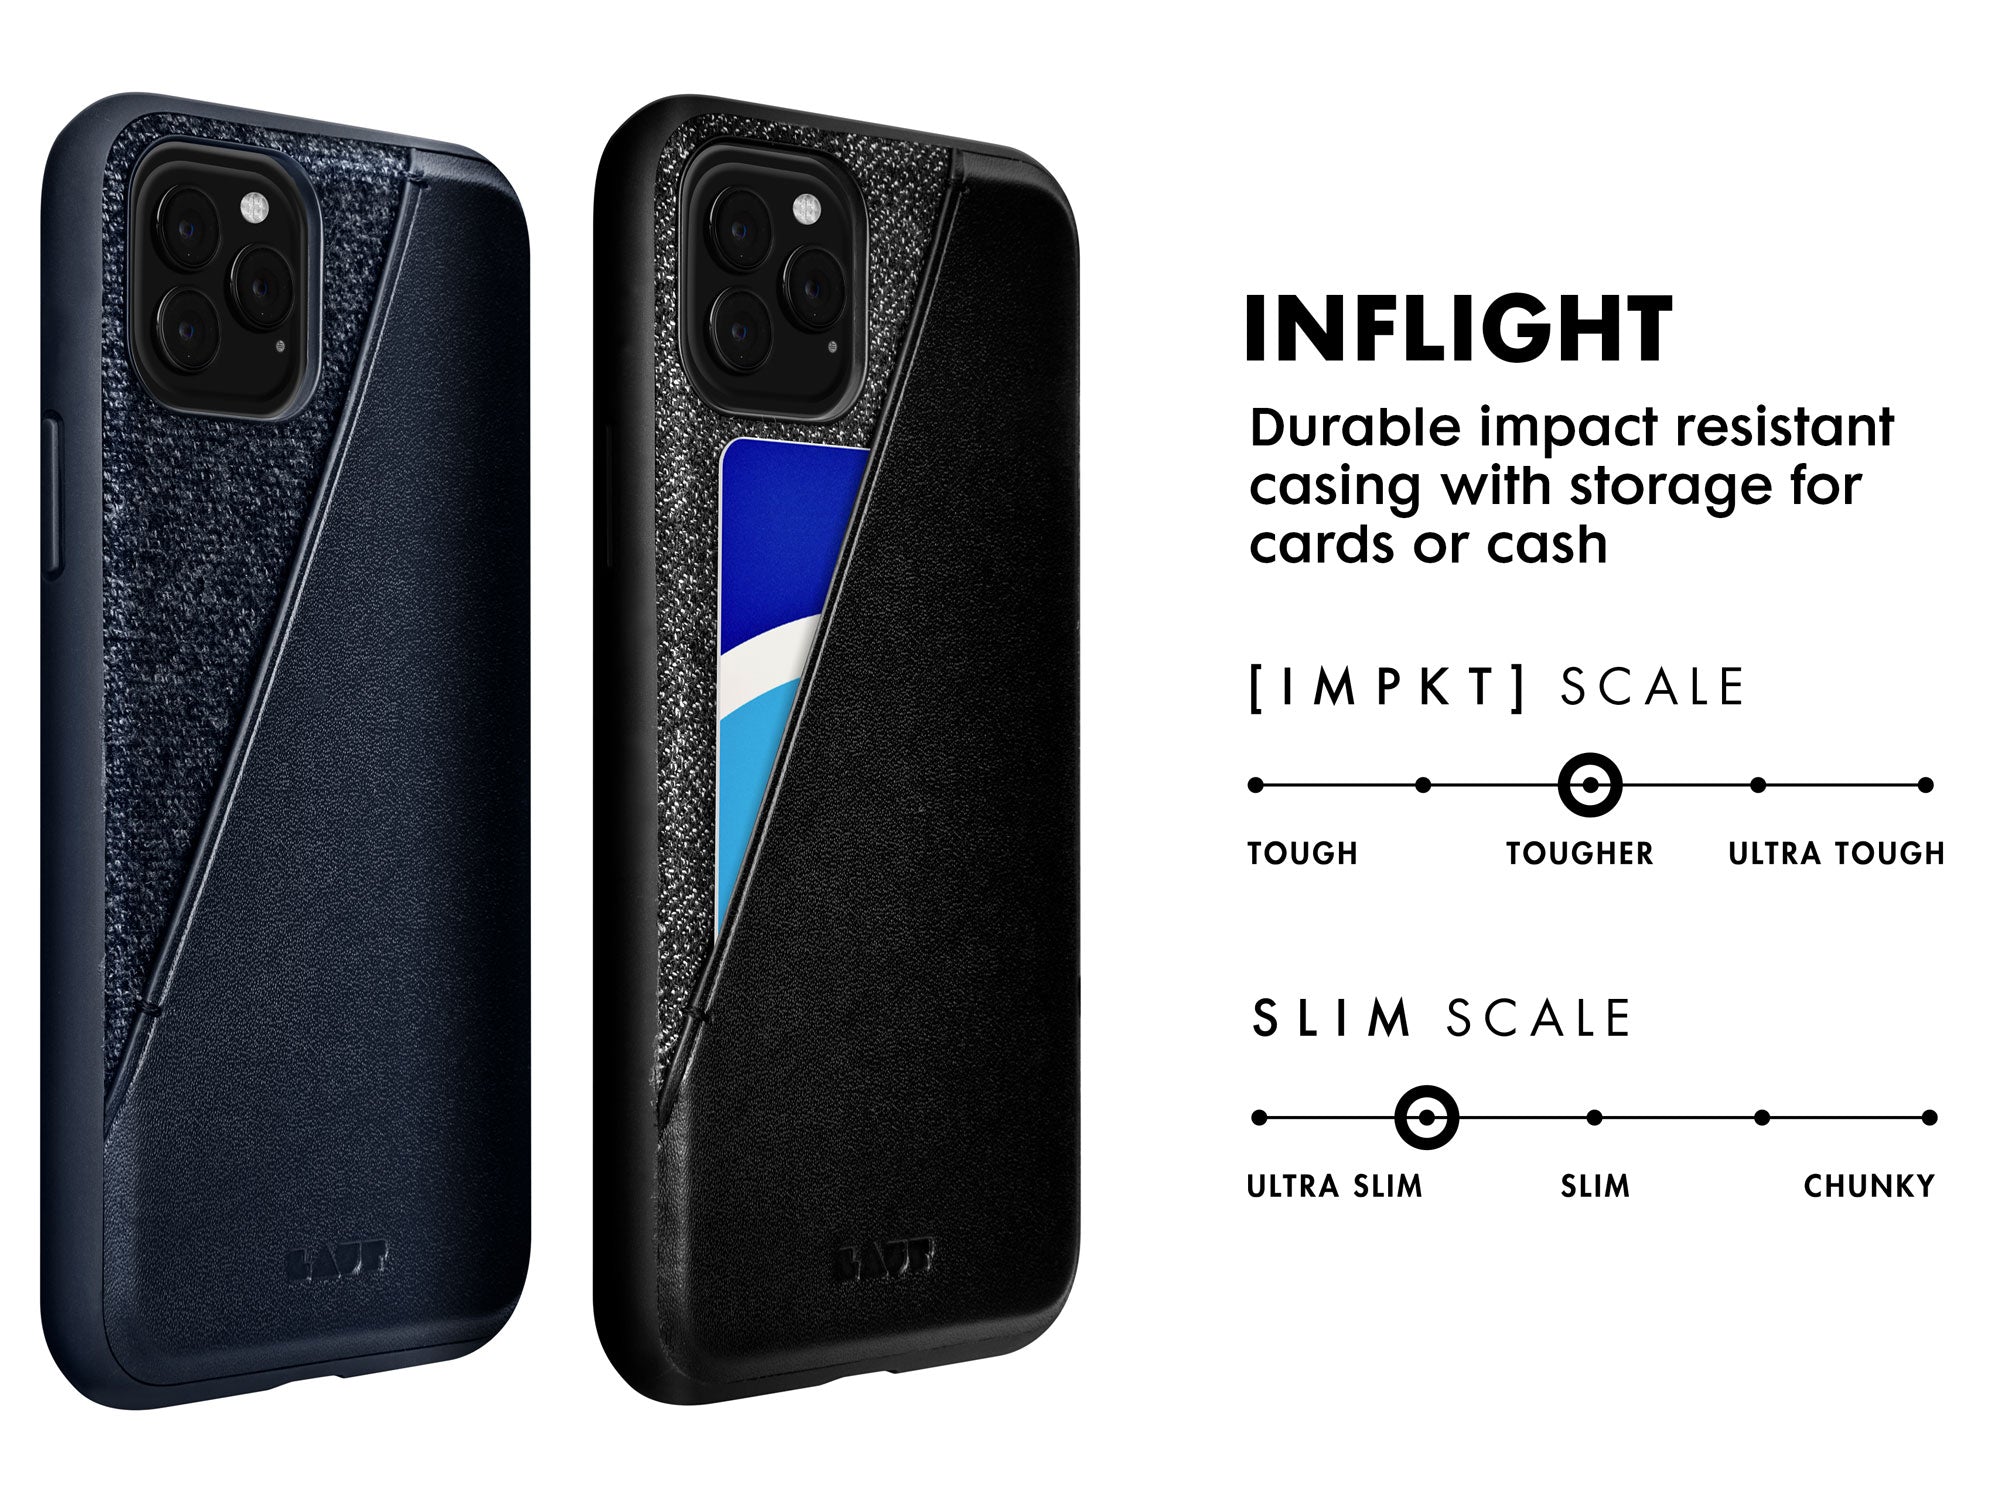 InFlight for iPhone 11 series